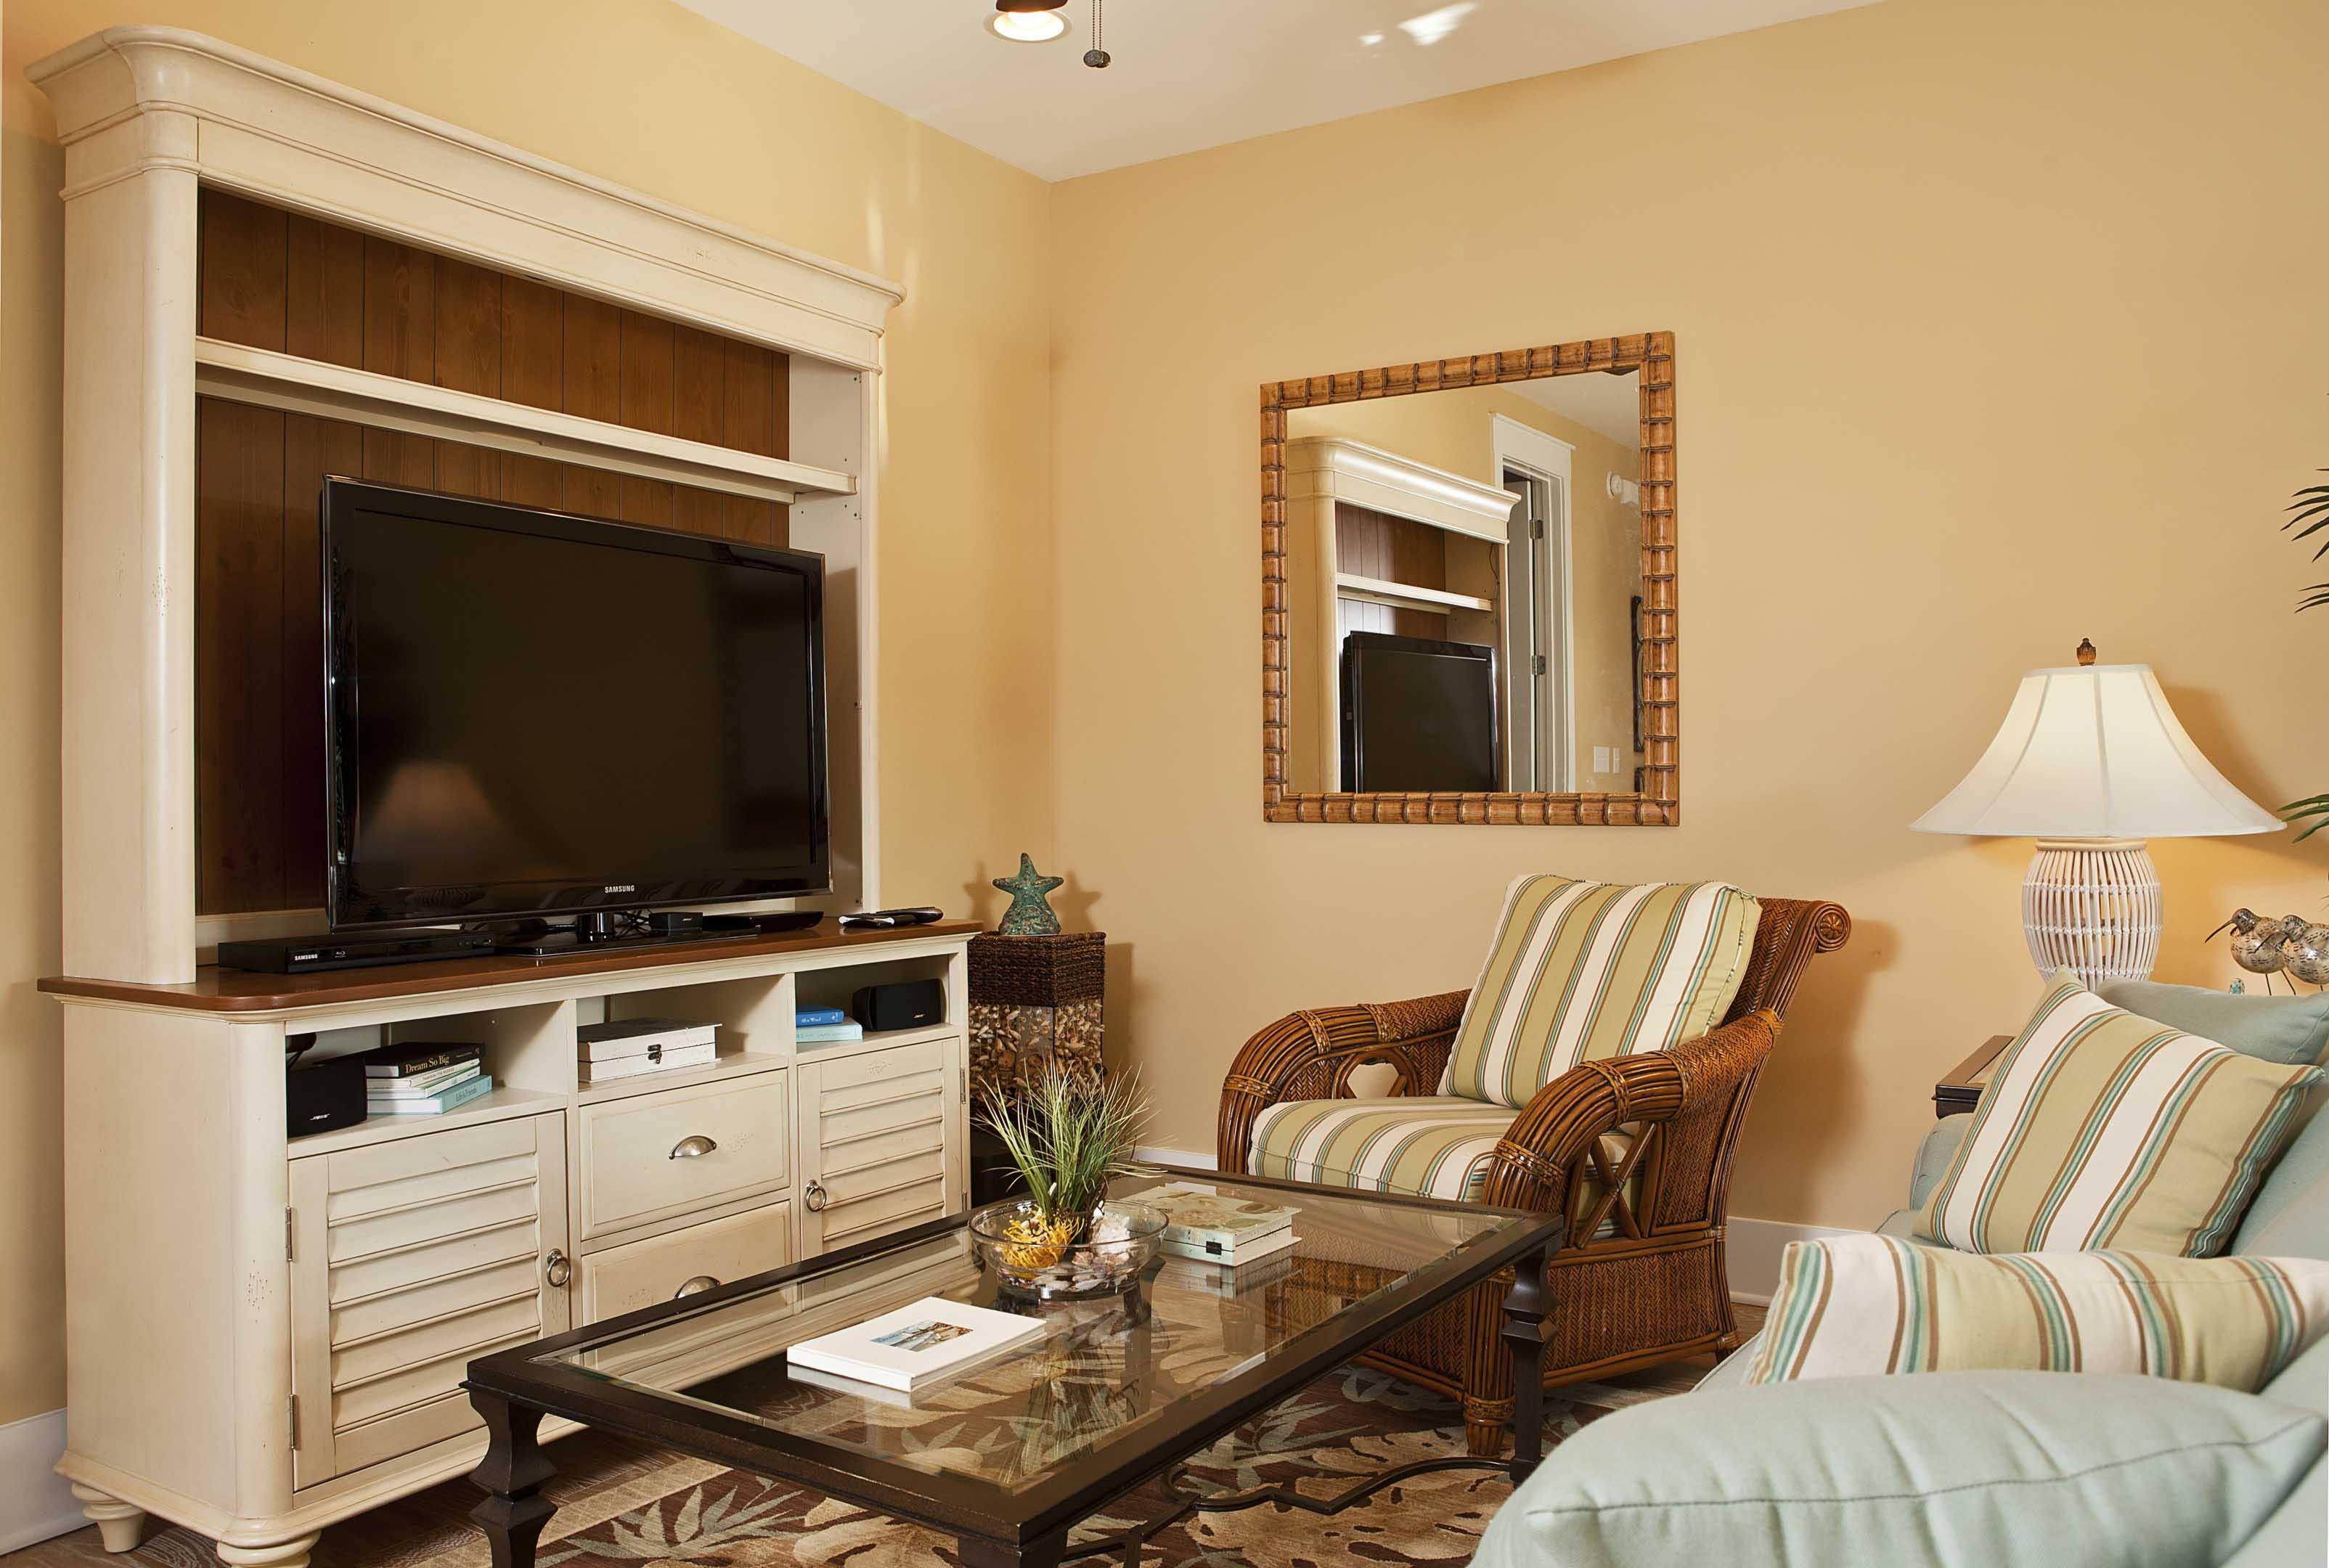 North Beach Cottages - 2 Bedroom Spa Villa Luxury Townhome